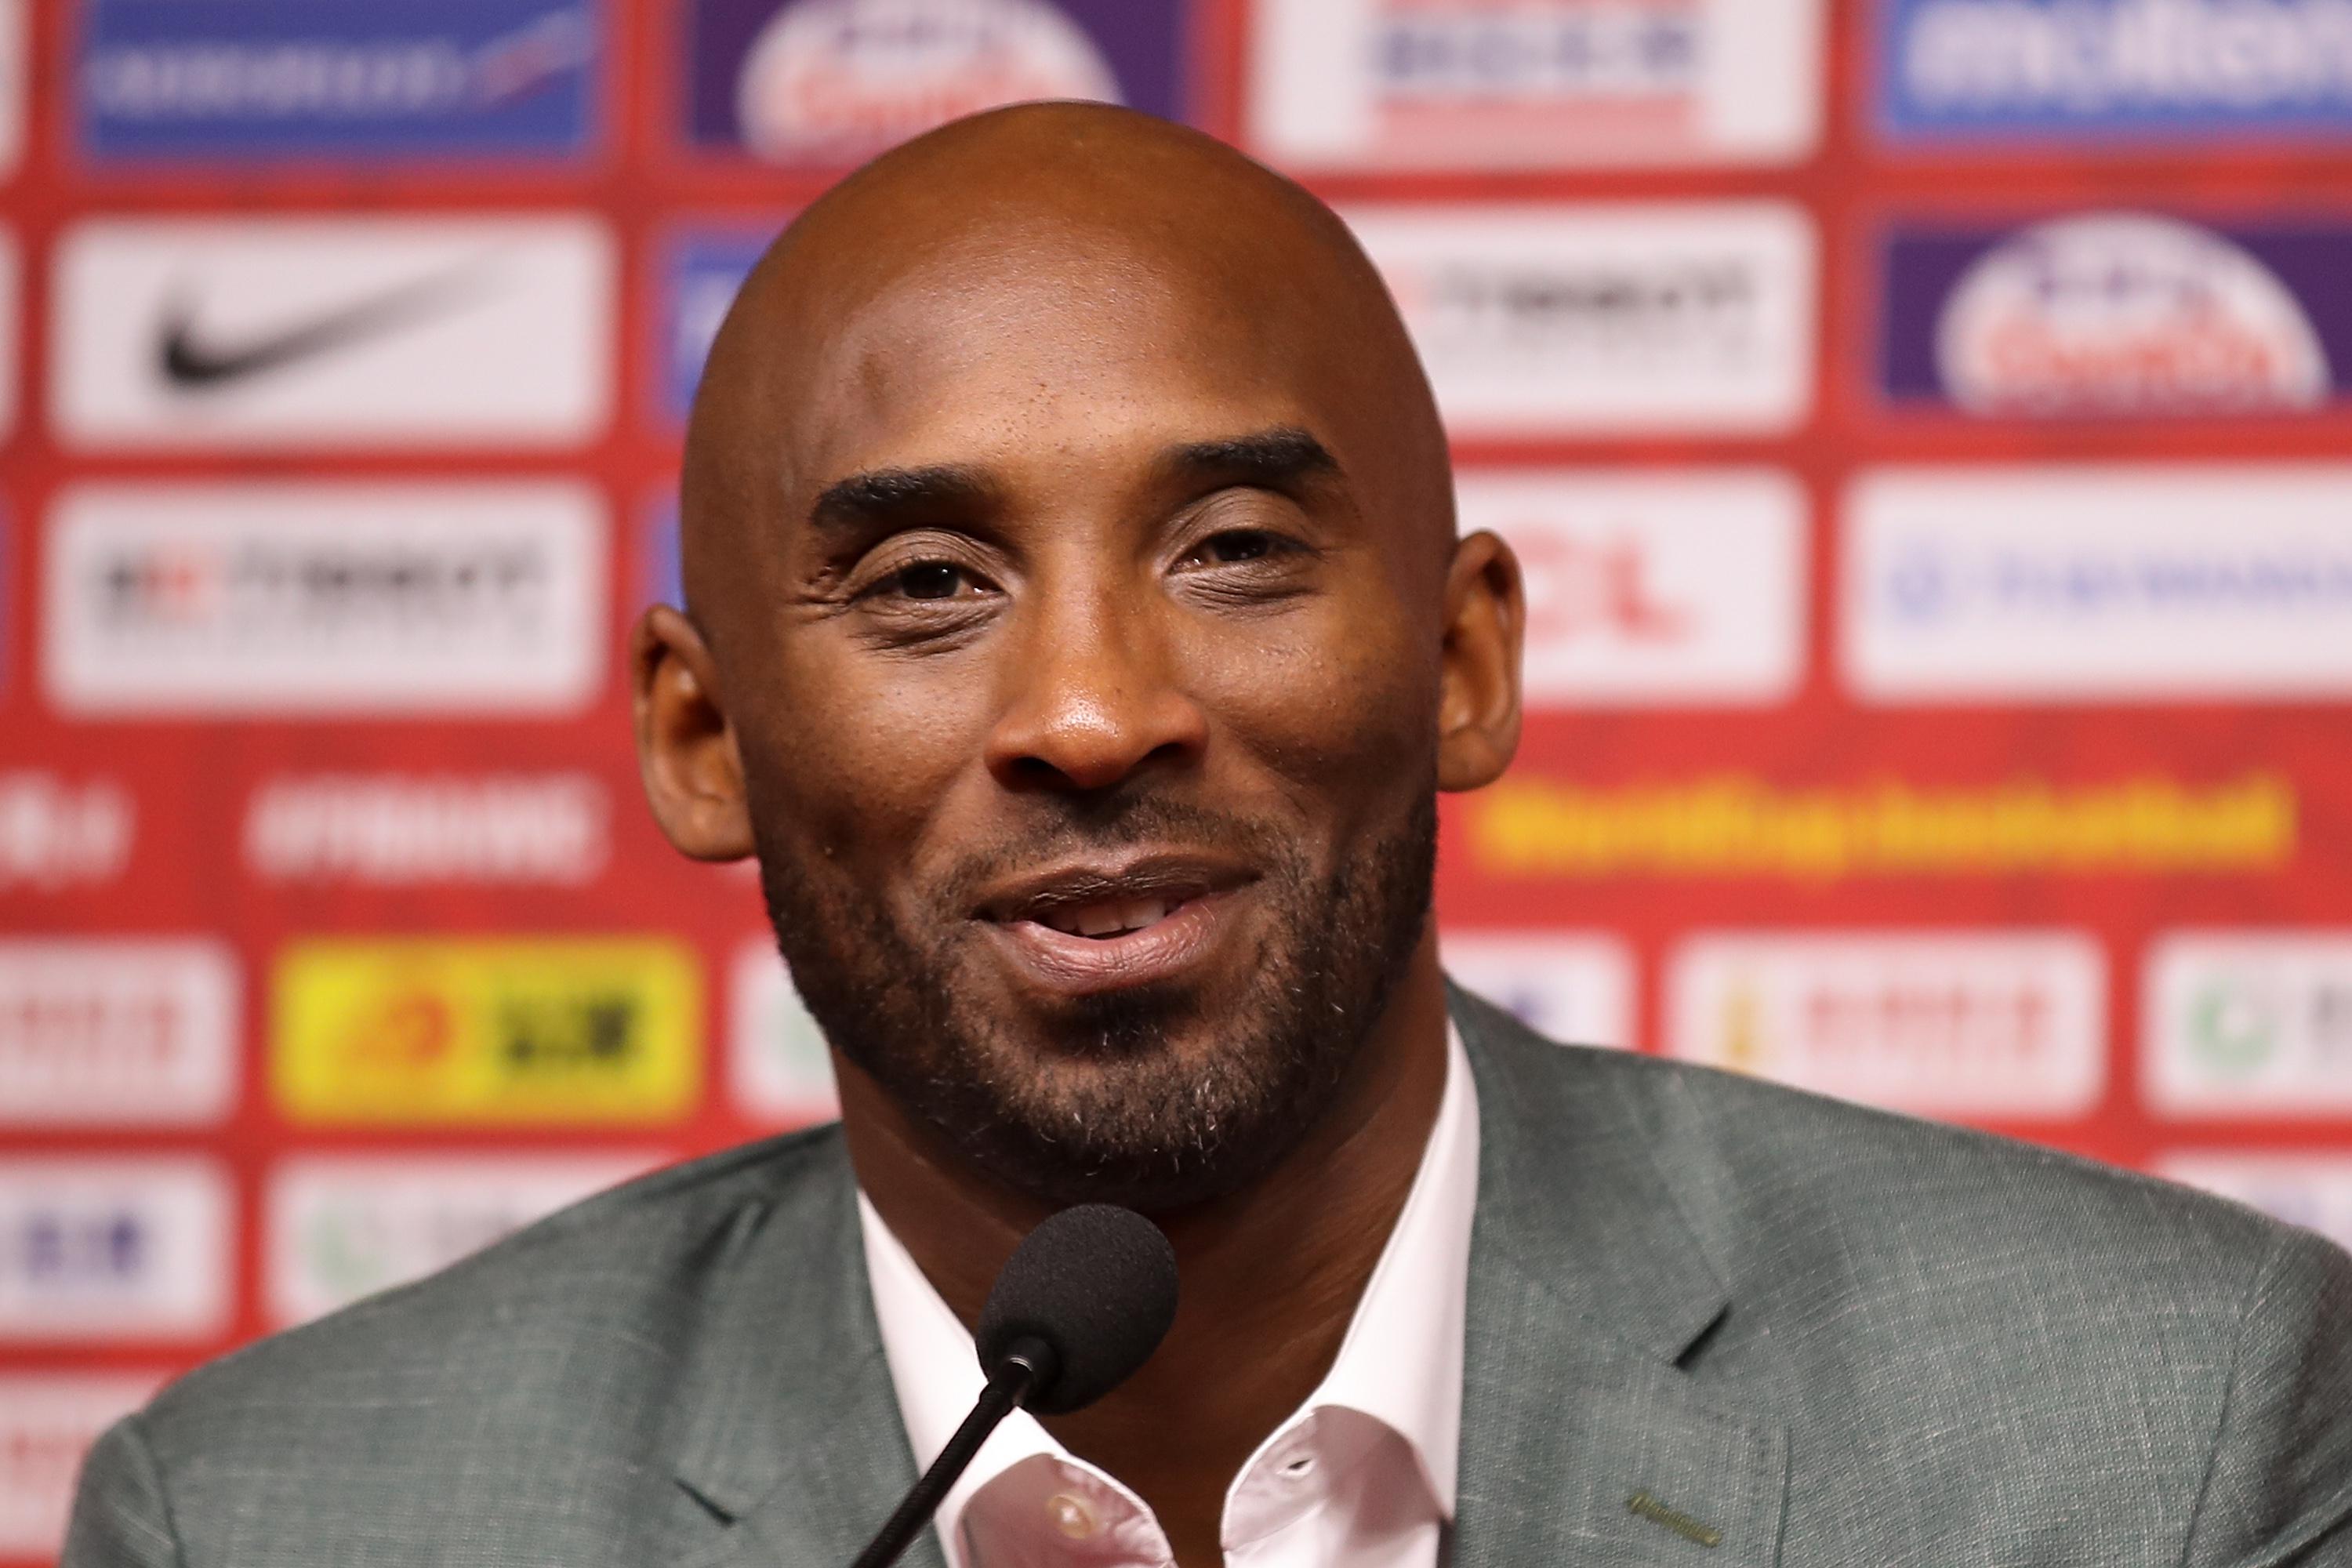 Kobe Bryant talking to the media at the 2019 FIBA World Cup in Beijing.